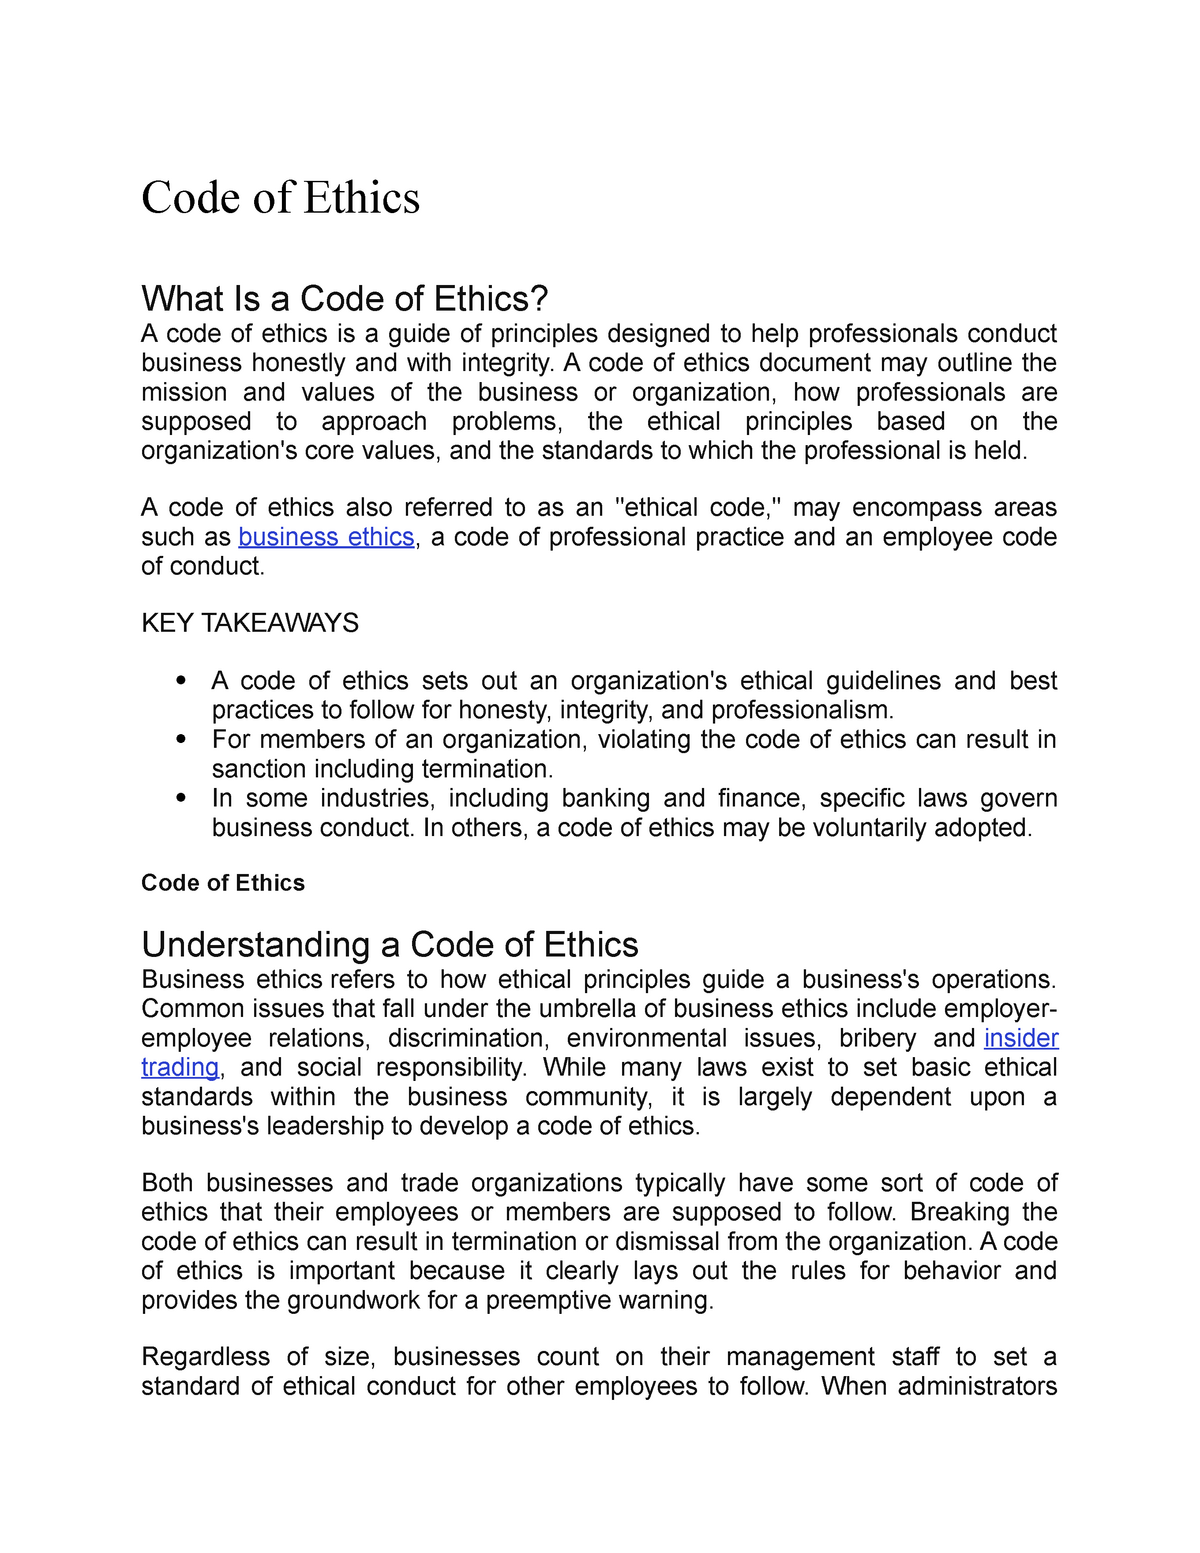 code of ethics essay introduction